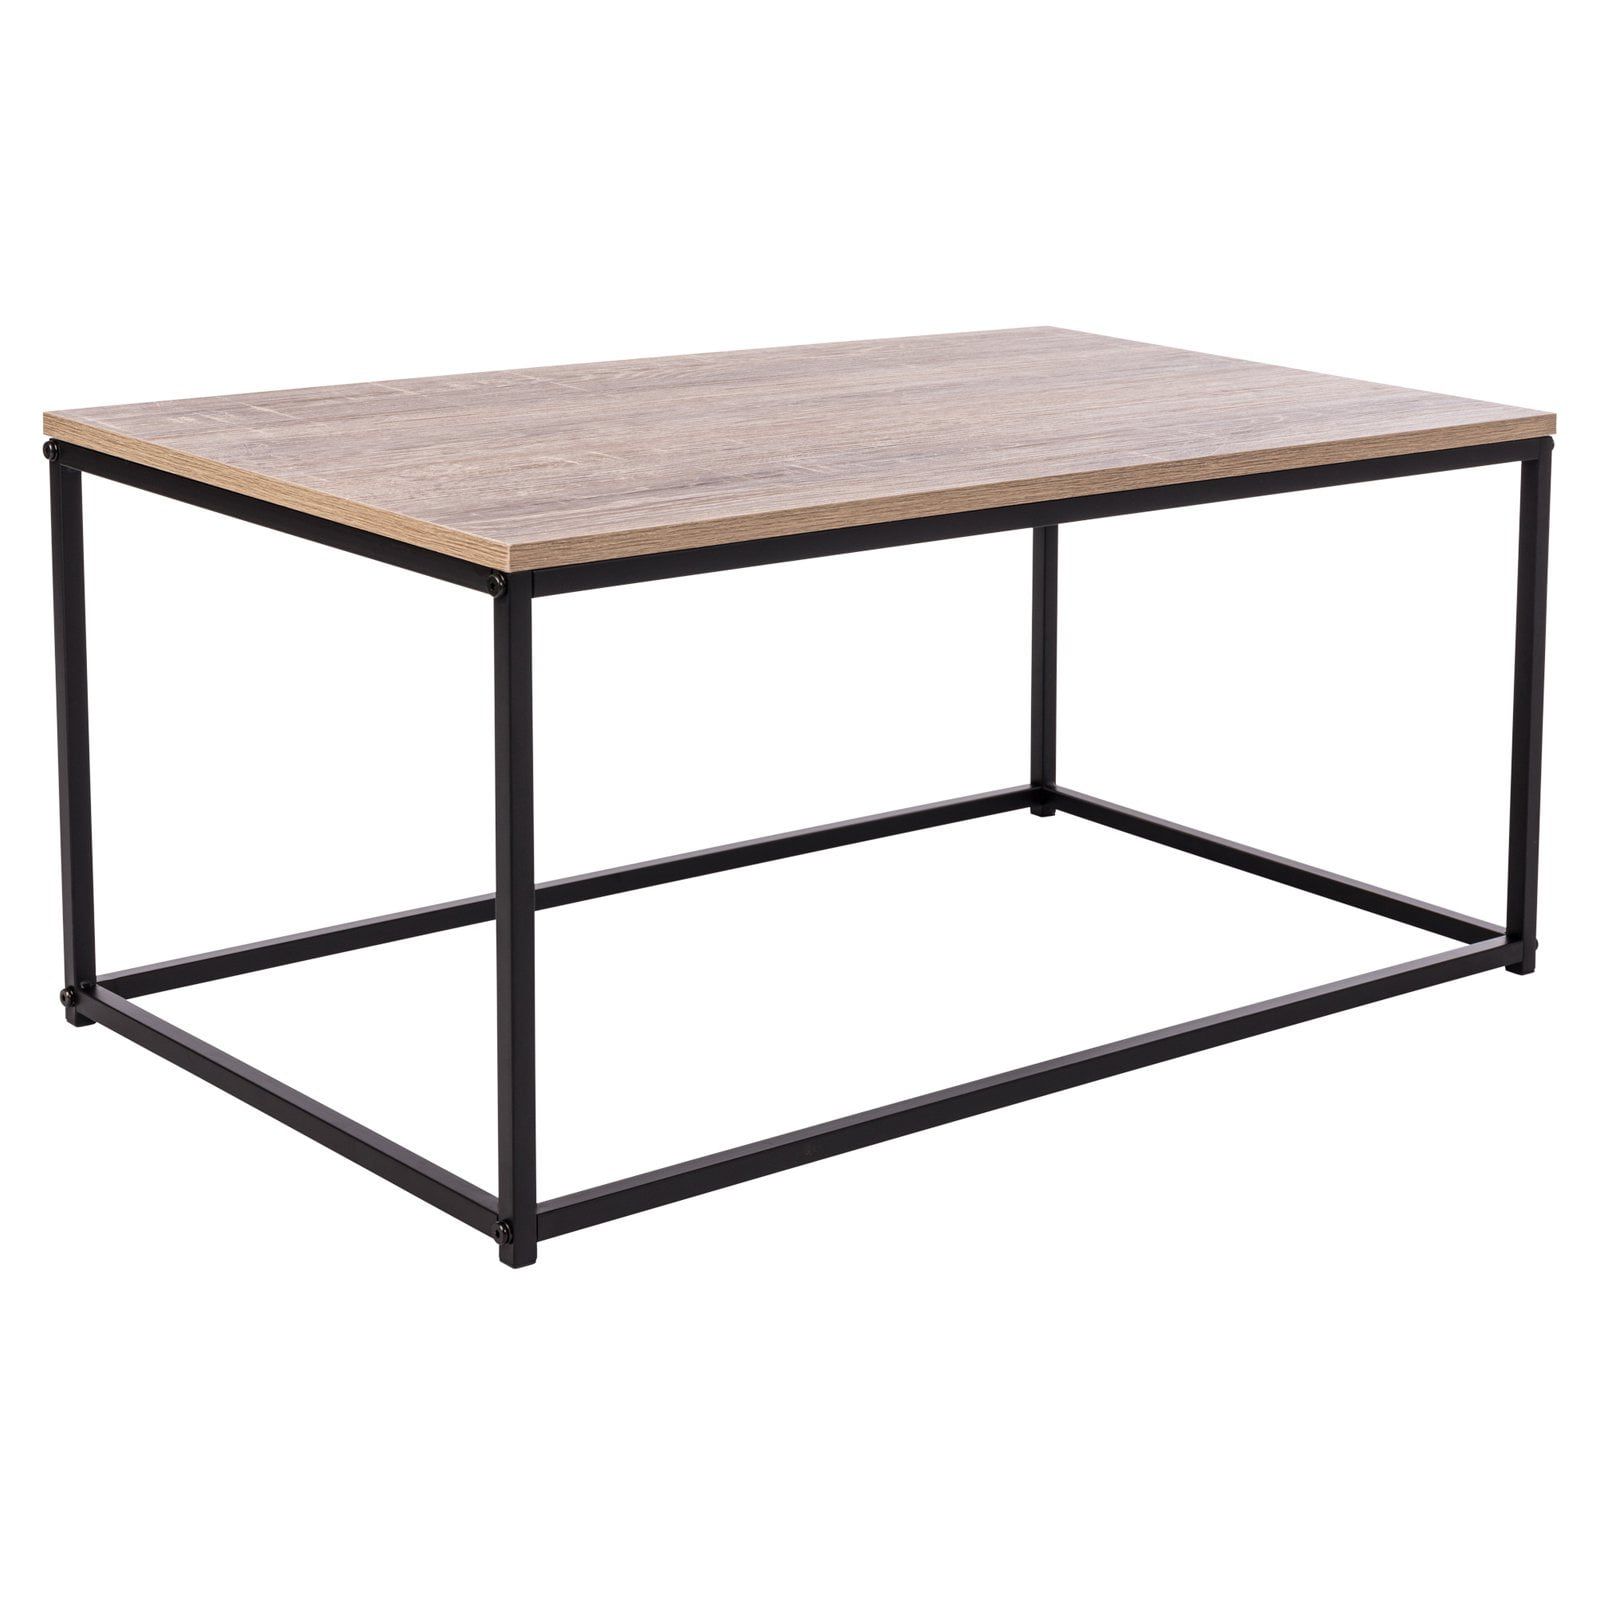 Avalon Home Tribeca Coffee Table – Walmart For Coffee Tables For 4 6 People (Gallery 3 of 20)